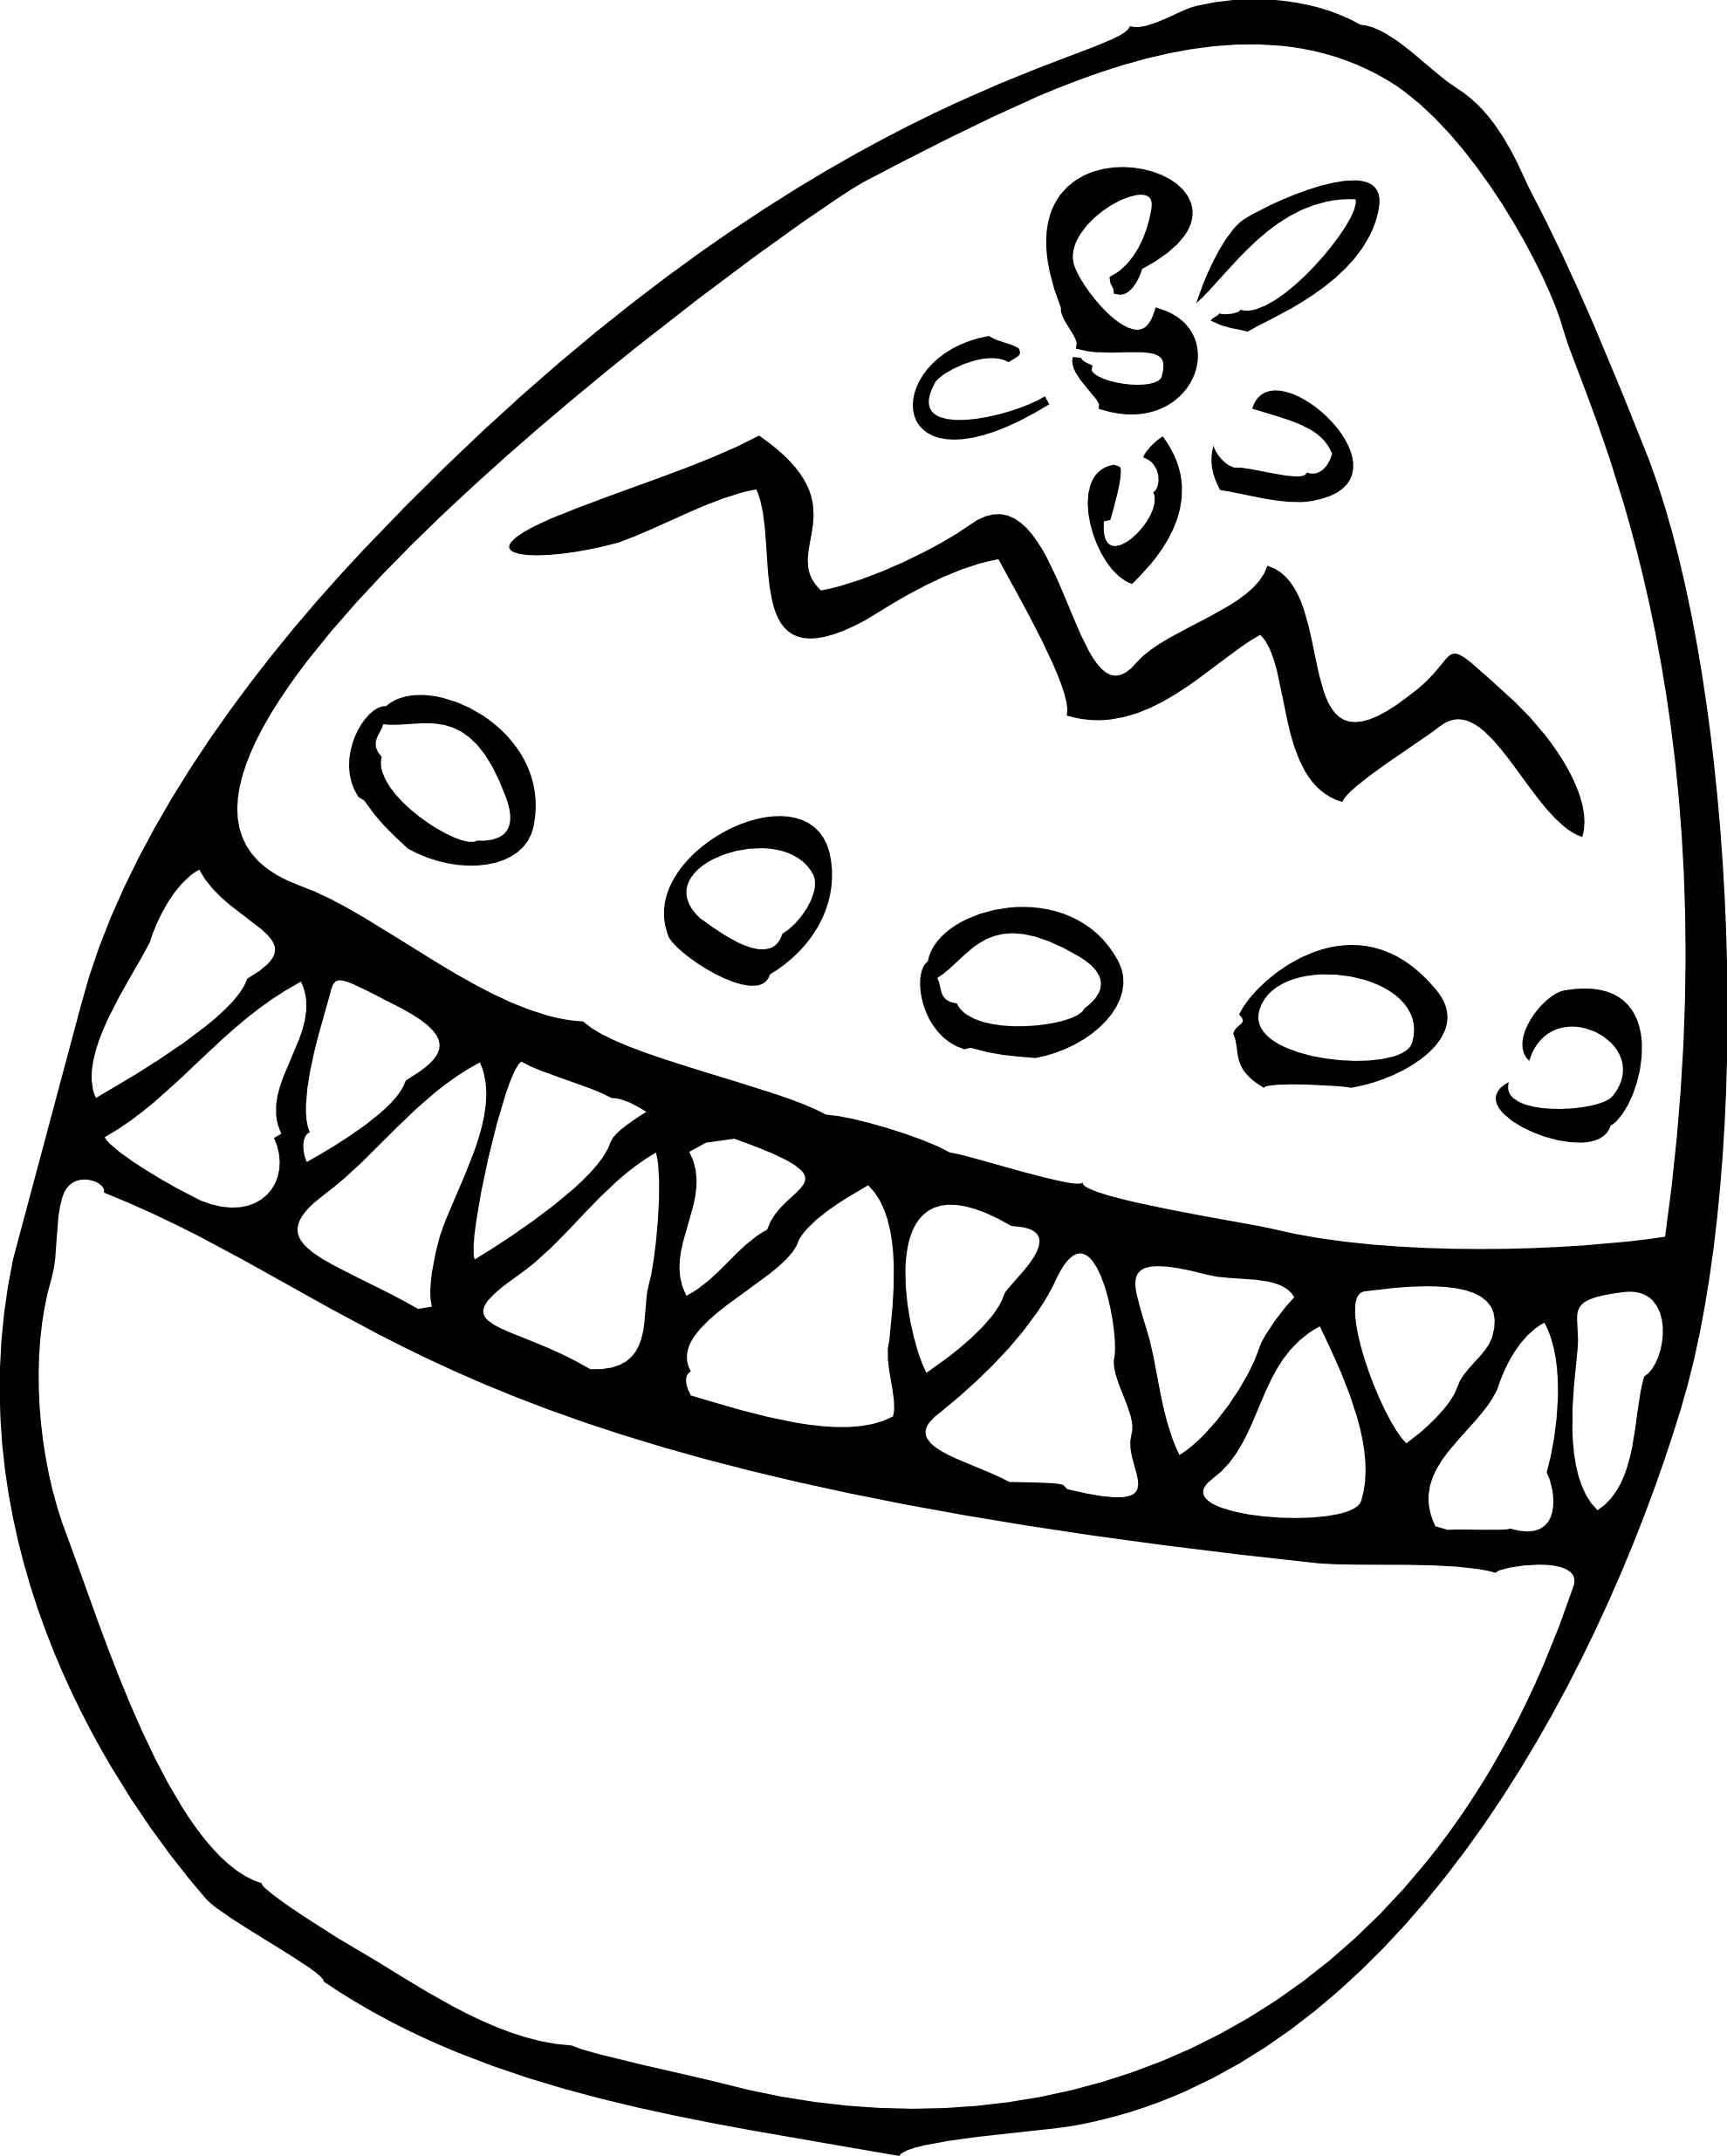 White clipart easter egg. Cute alligator drawing at